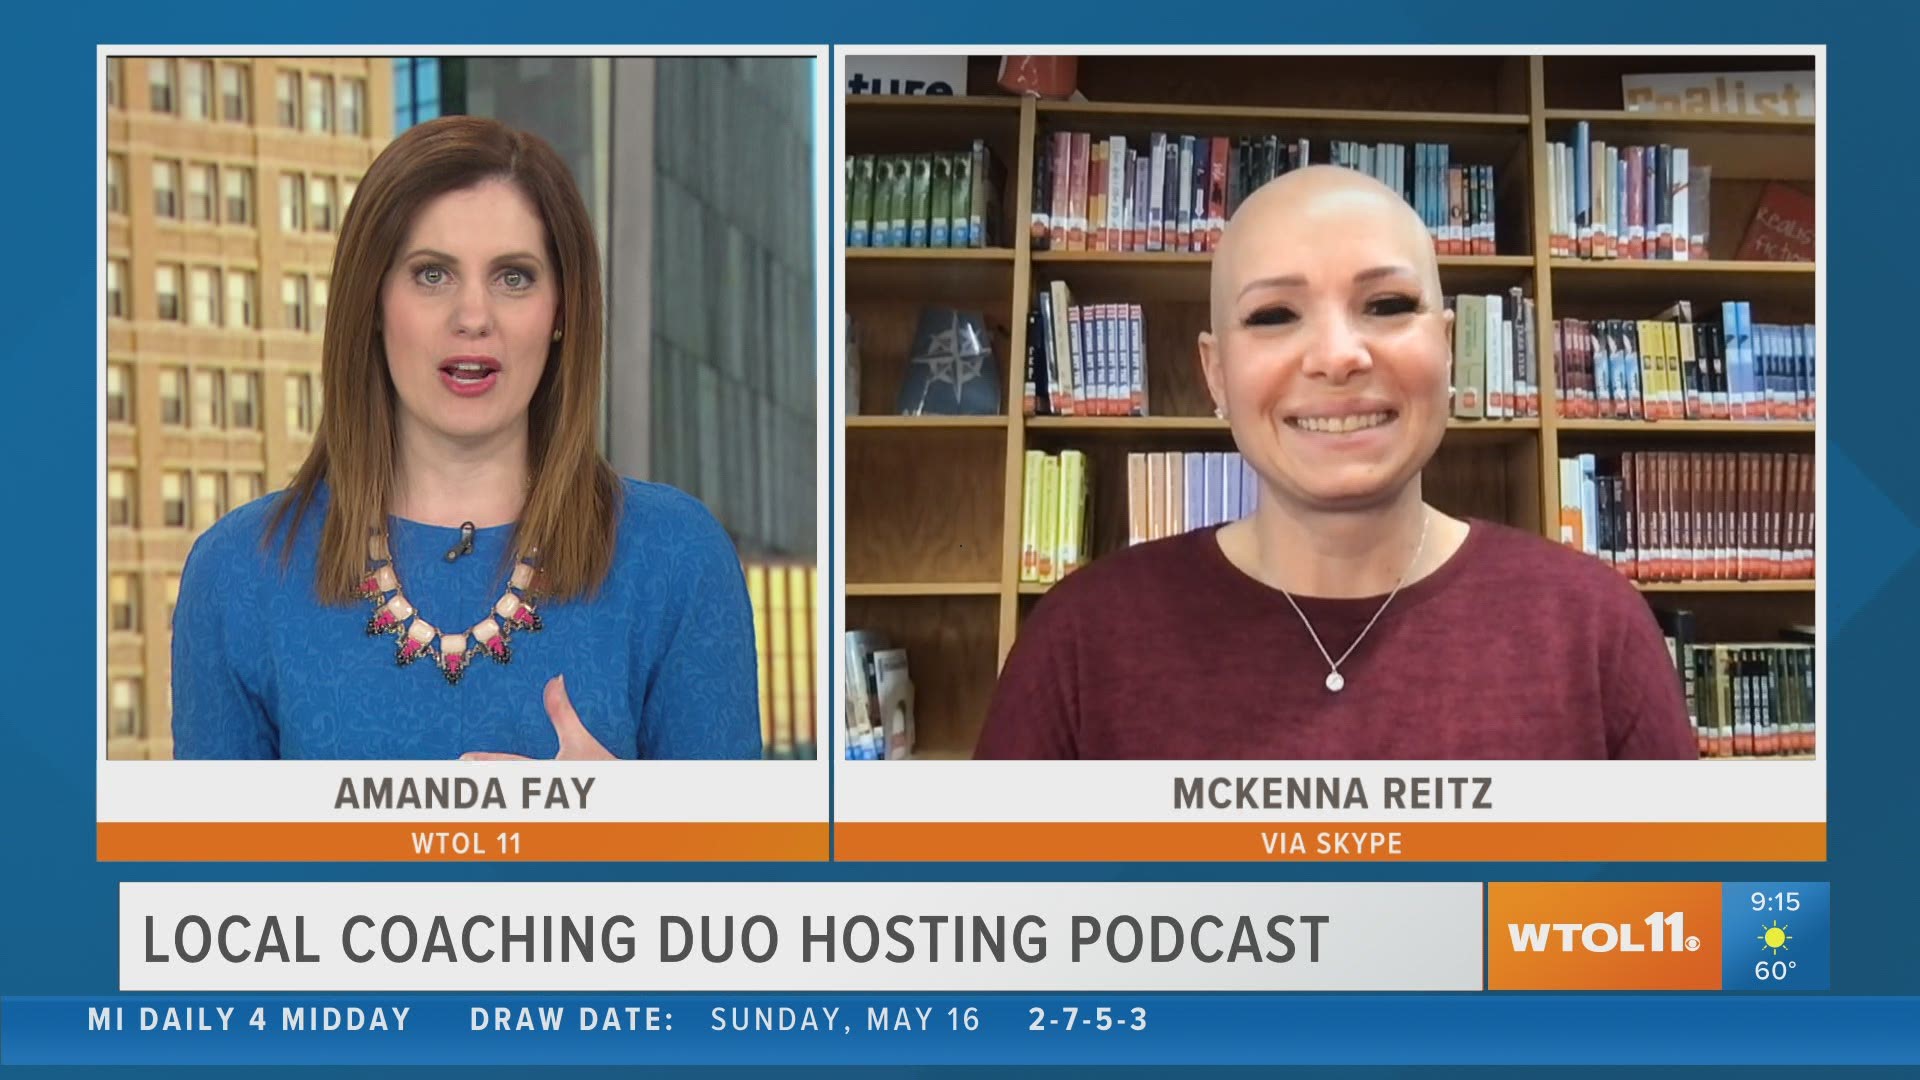 McKenna Reitz talks about her inspirational podcast and a way to hit the links to raise awareness for alopecia!